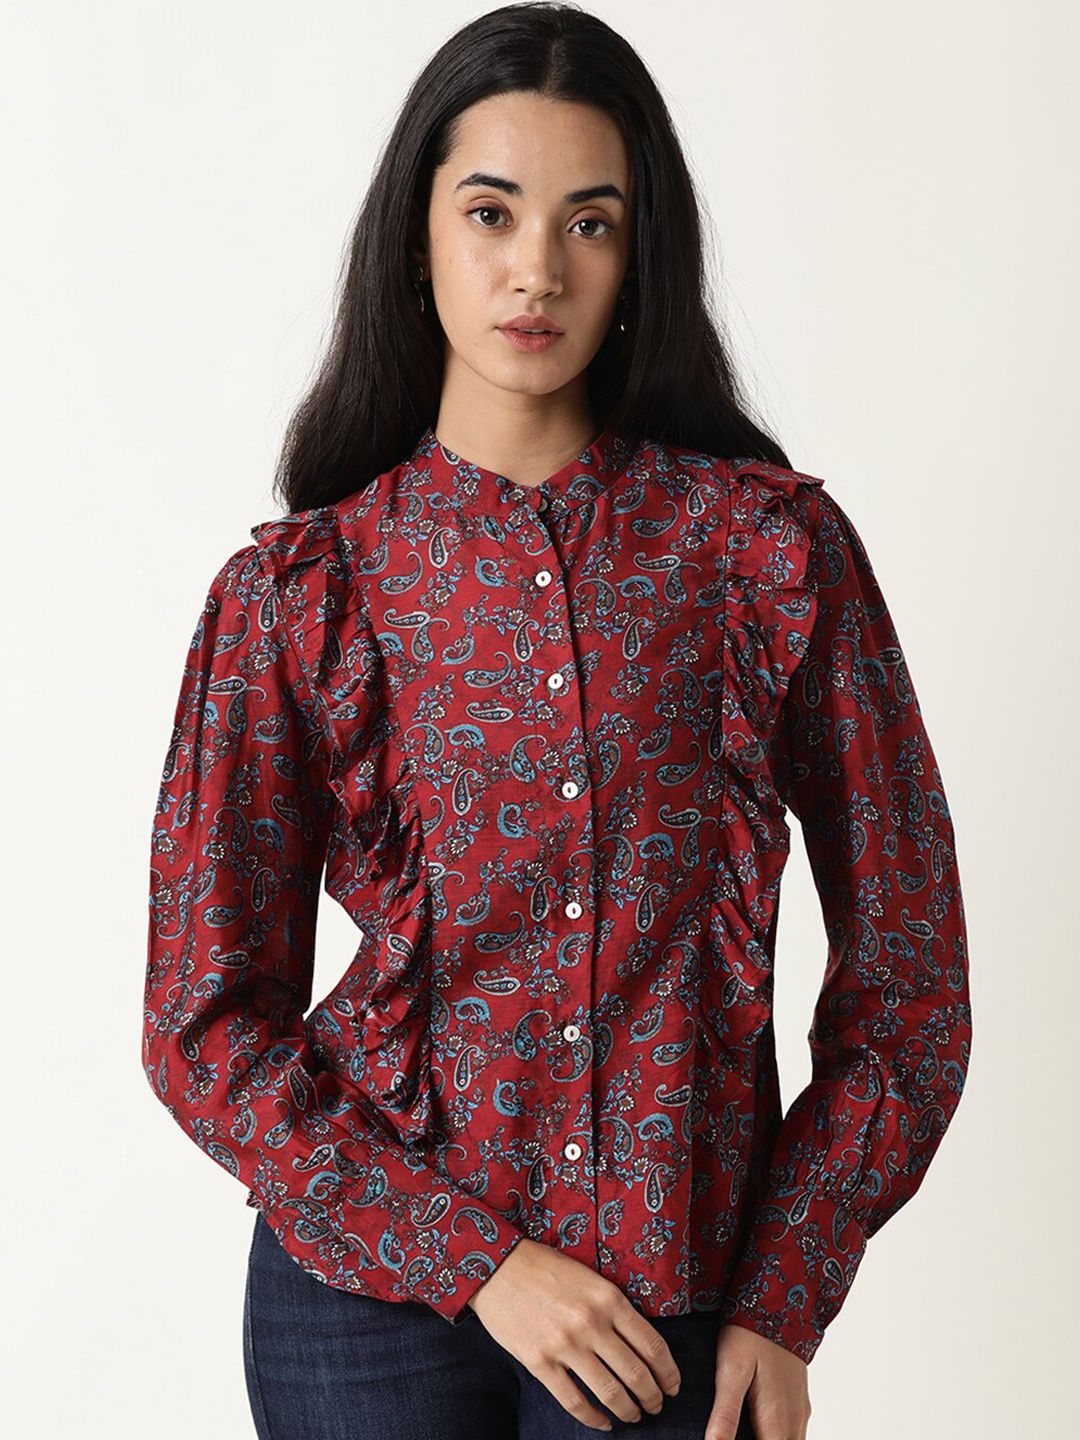 RAREISM Maroon Floral Print Shirt Style Top Price in India